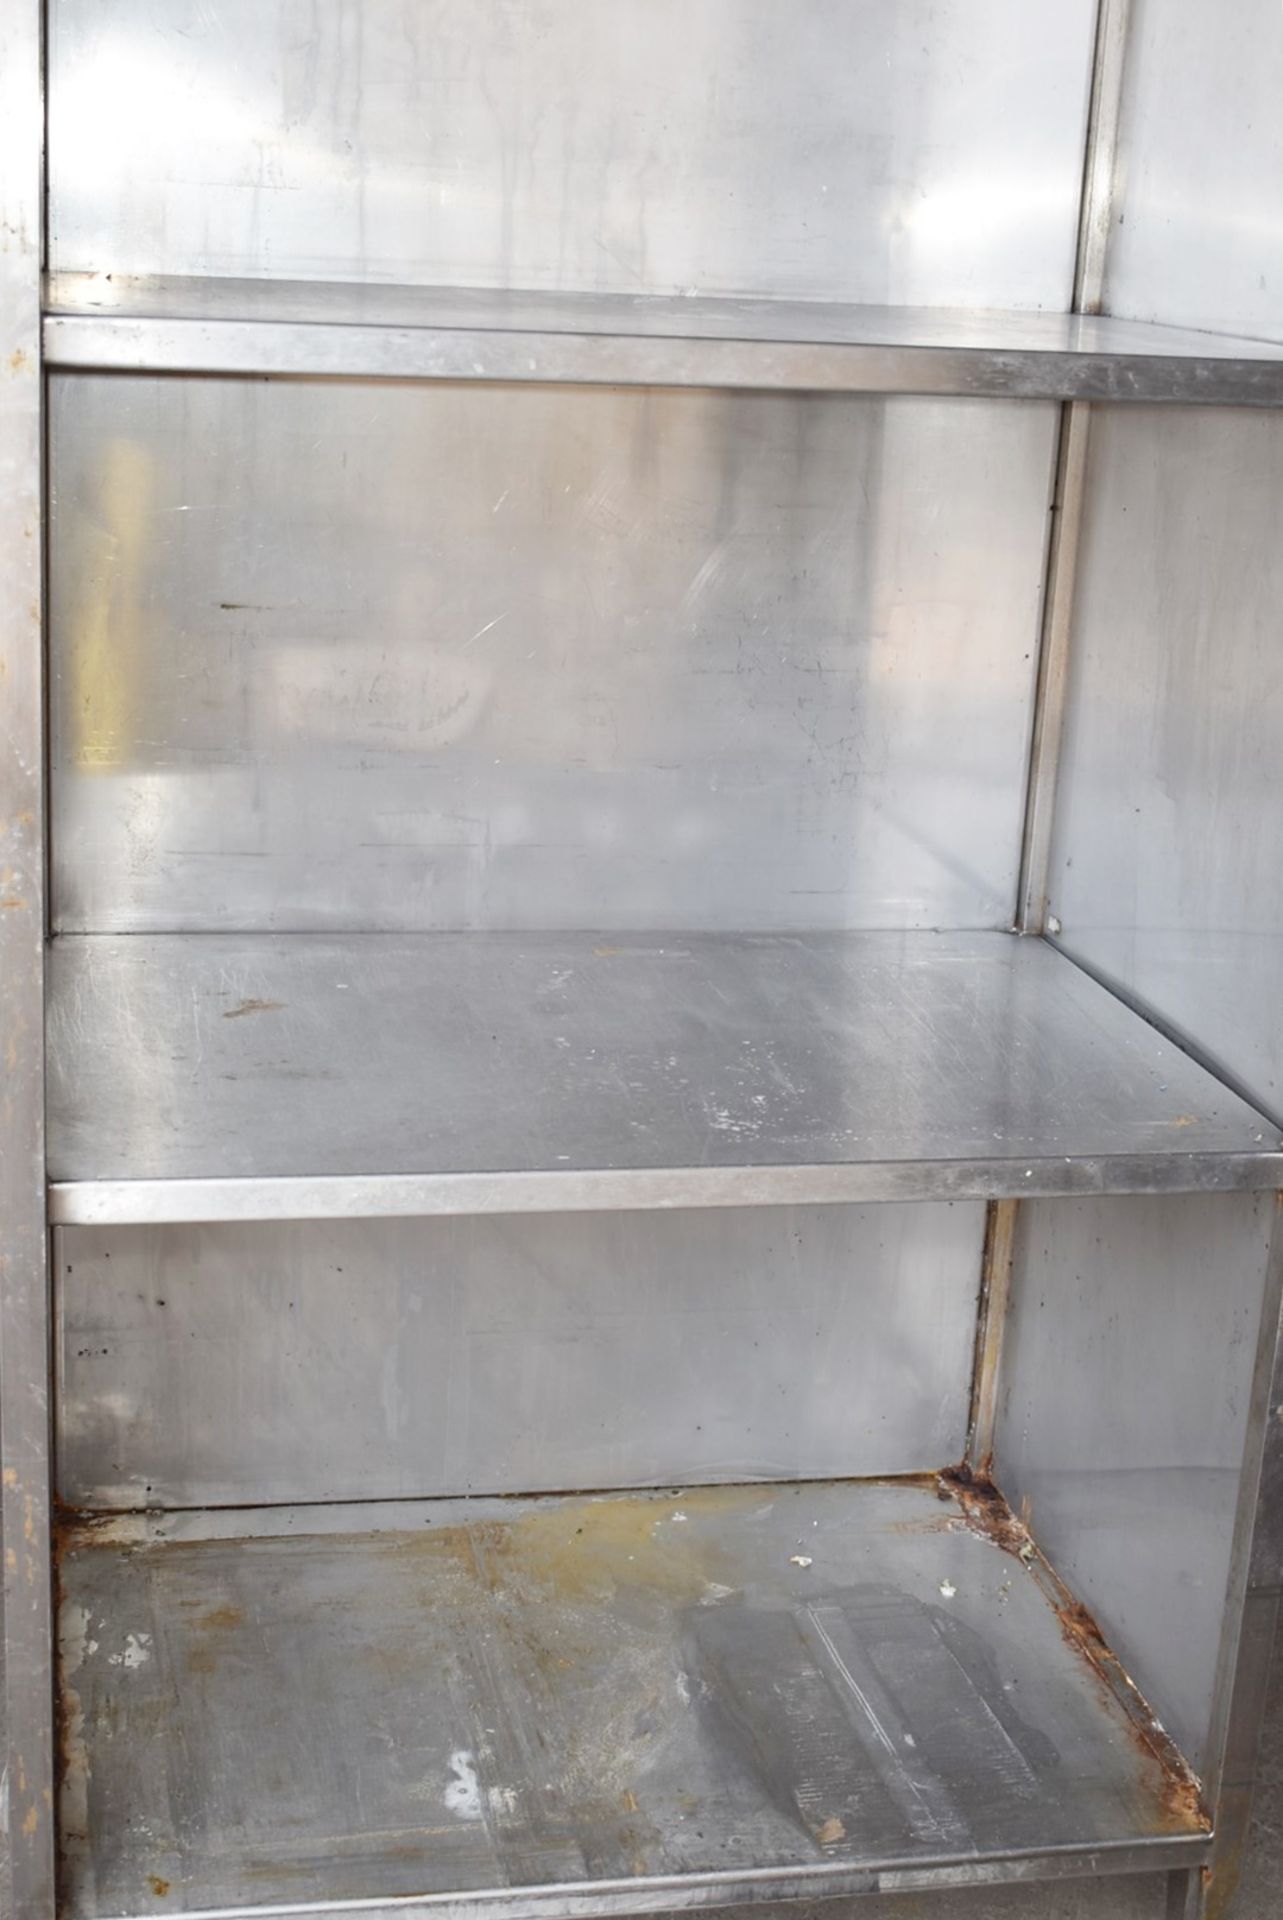 1 x Stainless Steel Commercial Mobile Kitchen Shelf Unit - Three Tier With Closed Side and Back Pane - Image 7 of 7